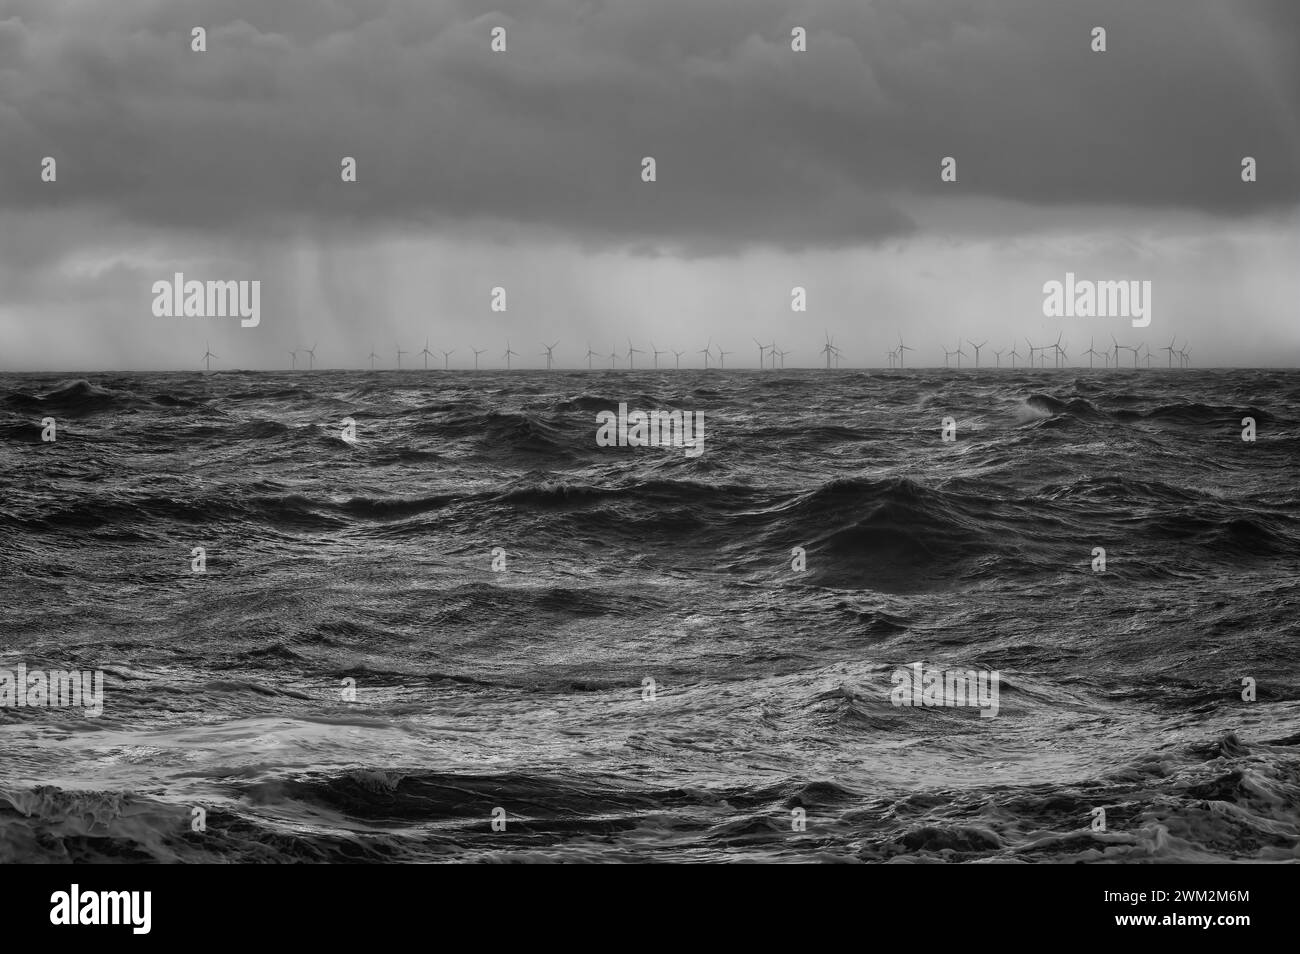 waves on a stormy day Stock Photo